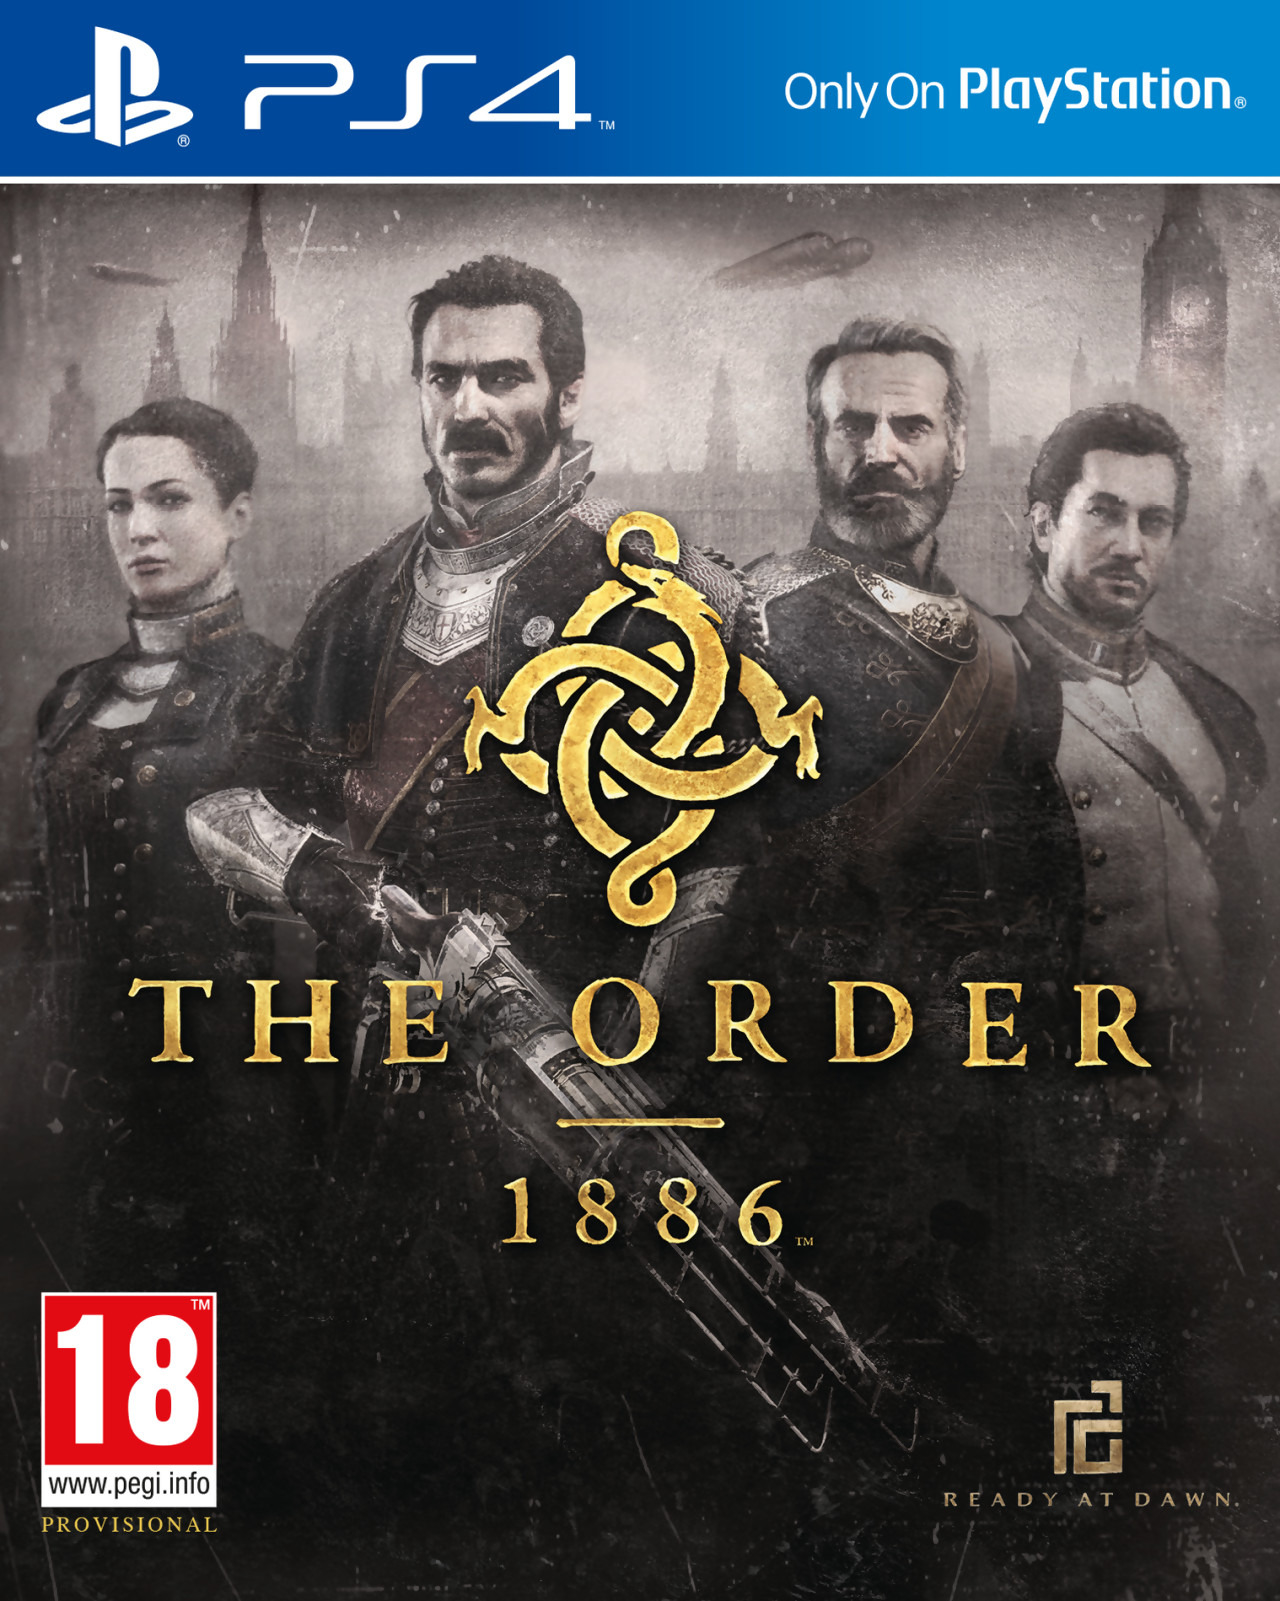 The Order 1886 / Орден 1886 [PS4 Exclusive] 5.05 / 6.72 [EUR] (2015) [Русский/Английский] (v1.02)